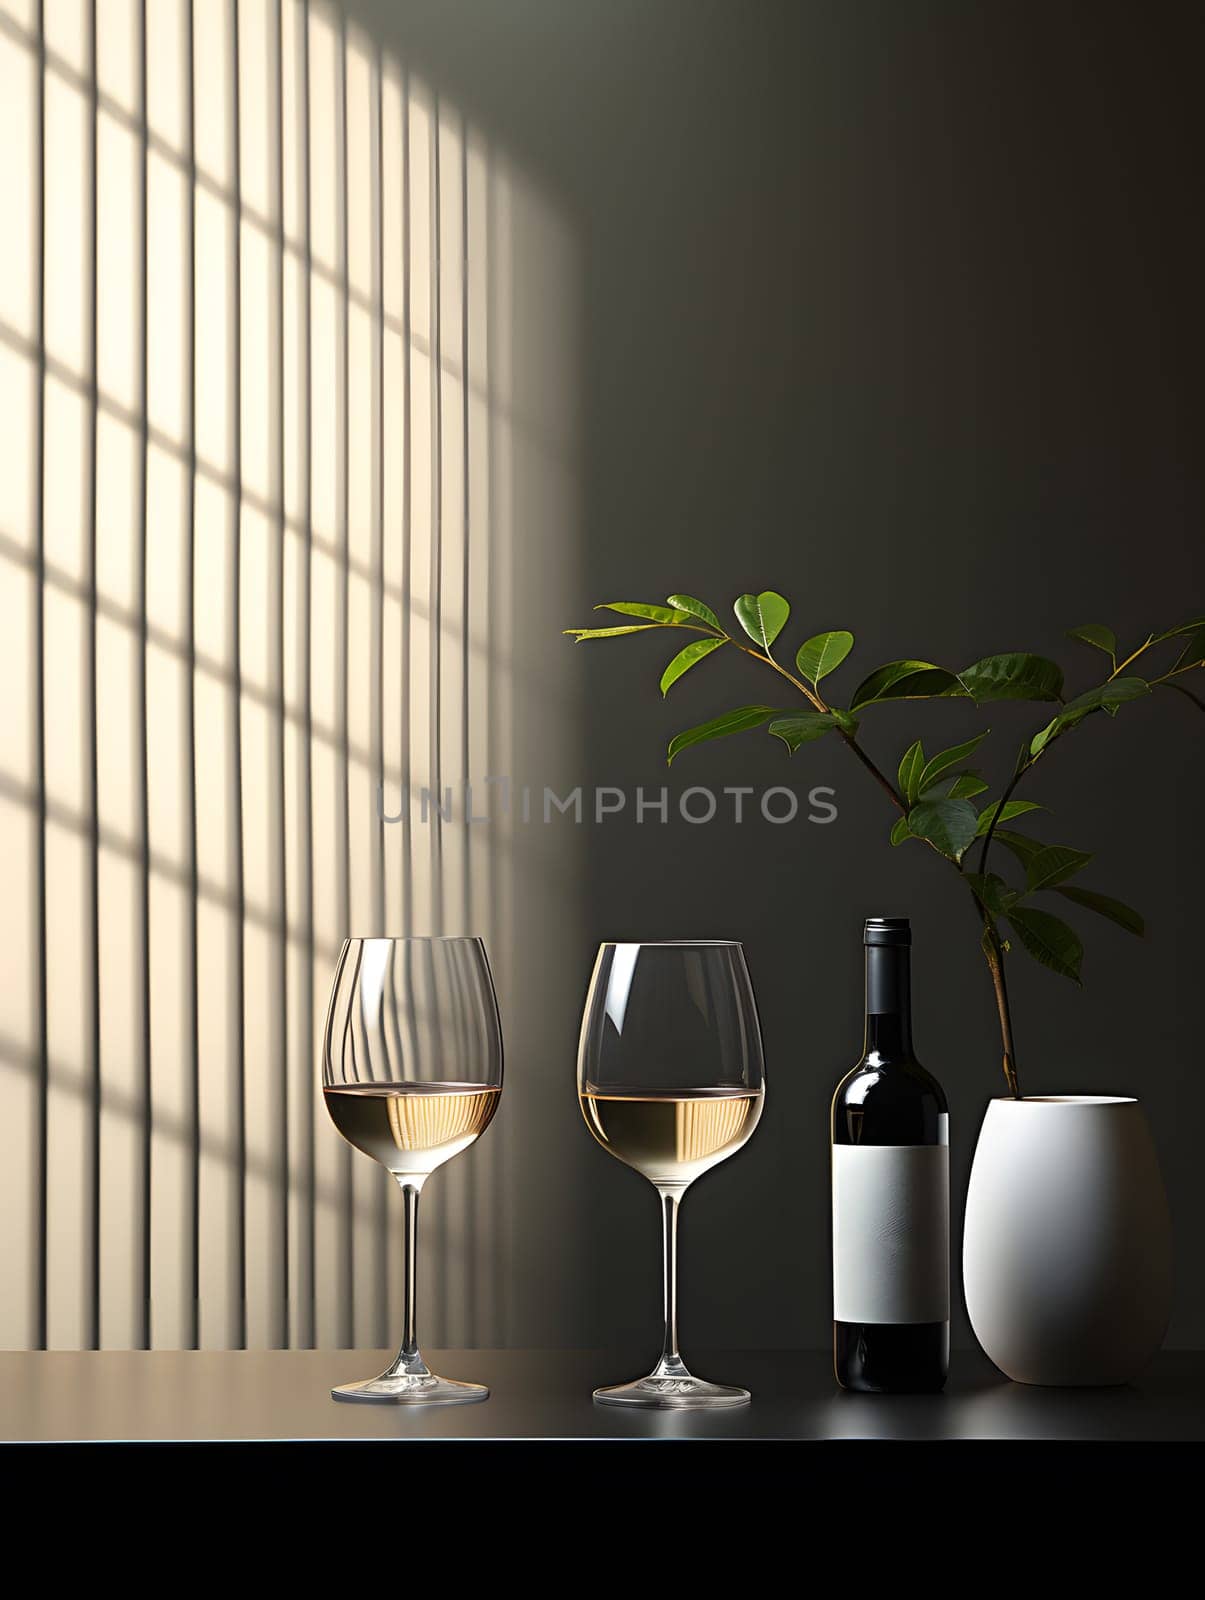 Tableware set with two wine glasses and a bottle of wine by Nadtochiy